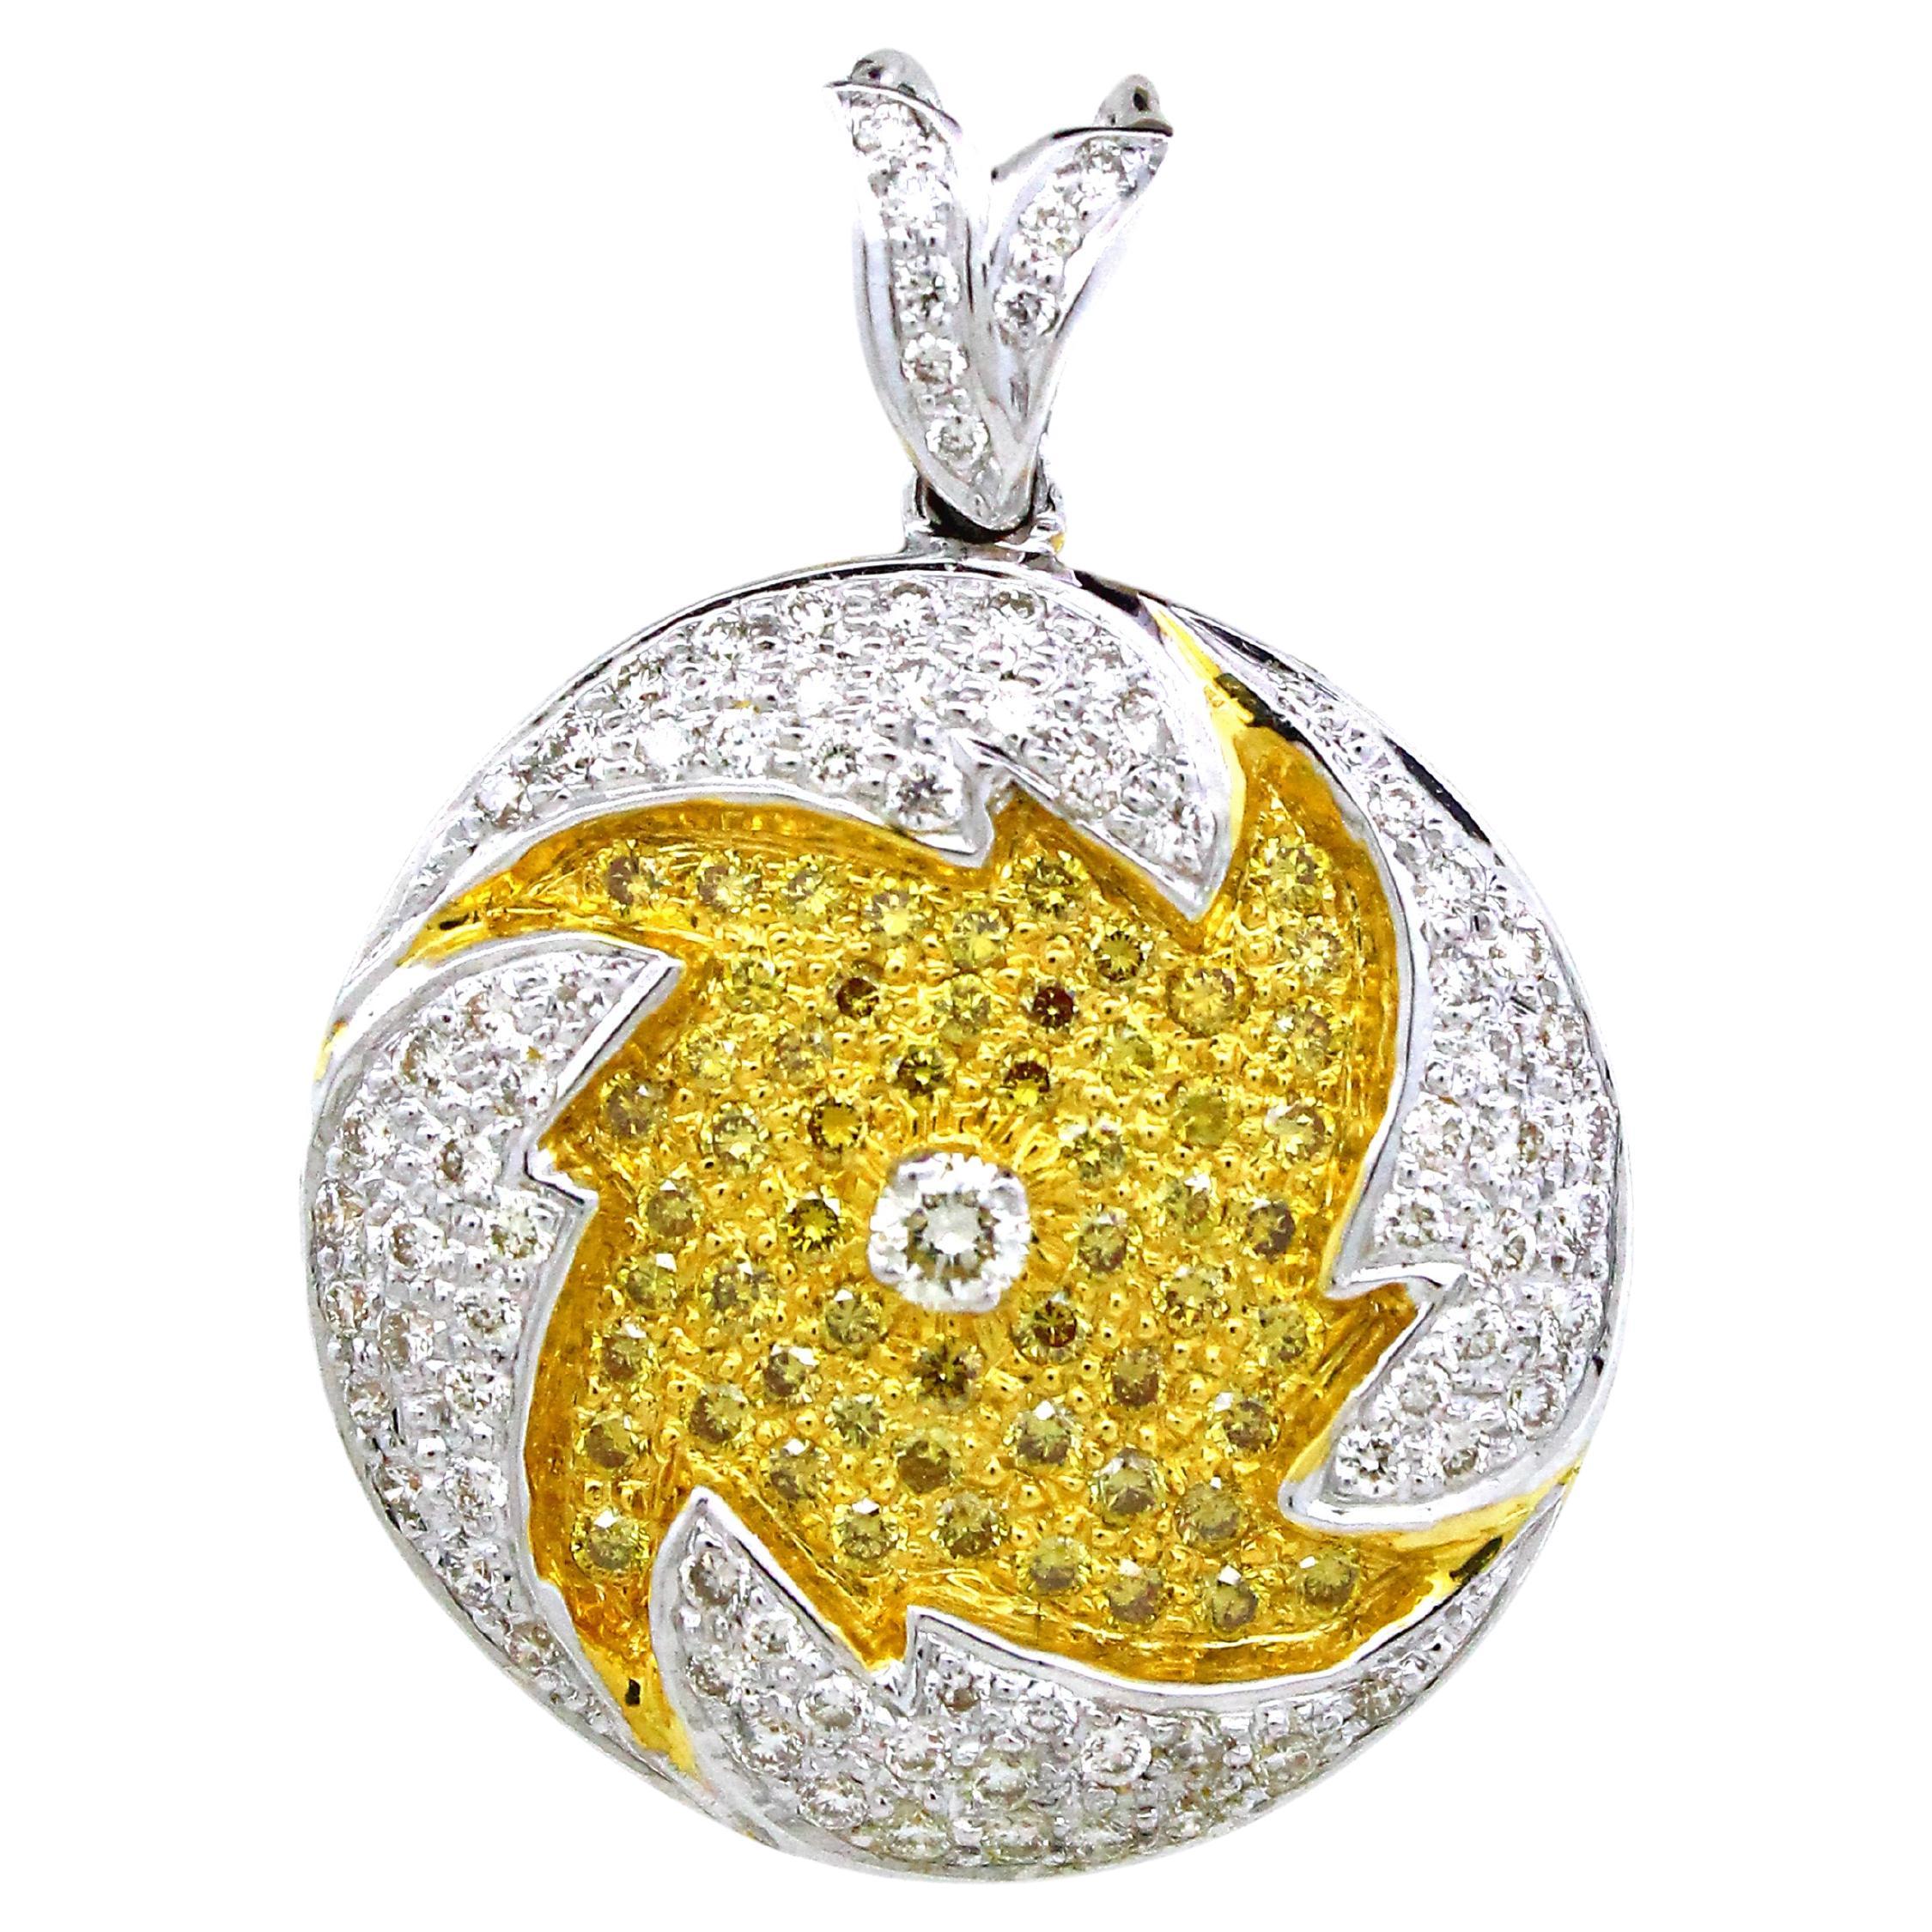 1.26 carats of yellow and white diamond Fire Goblet Pendant